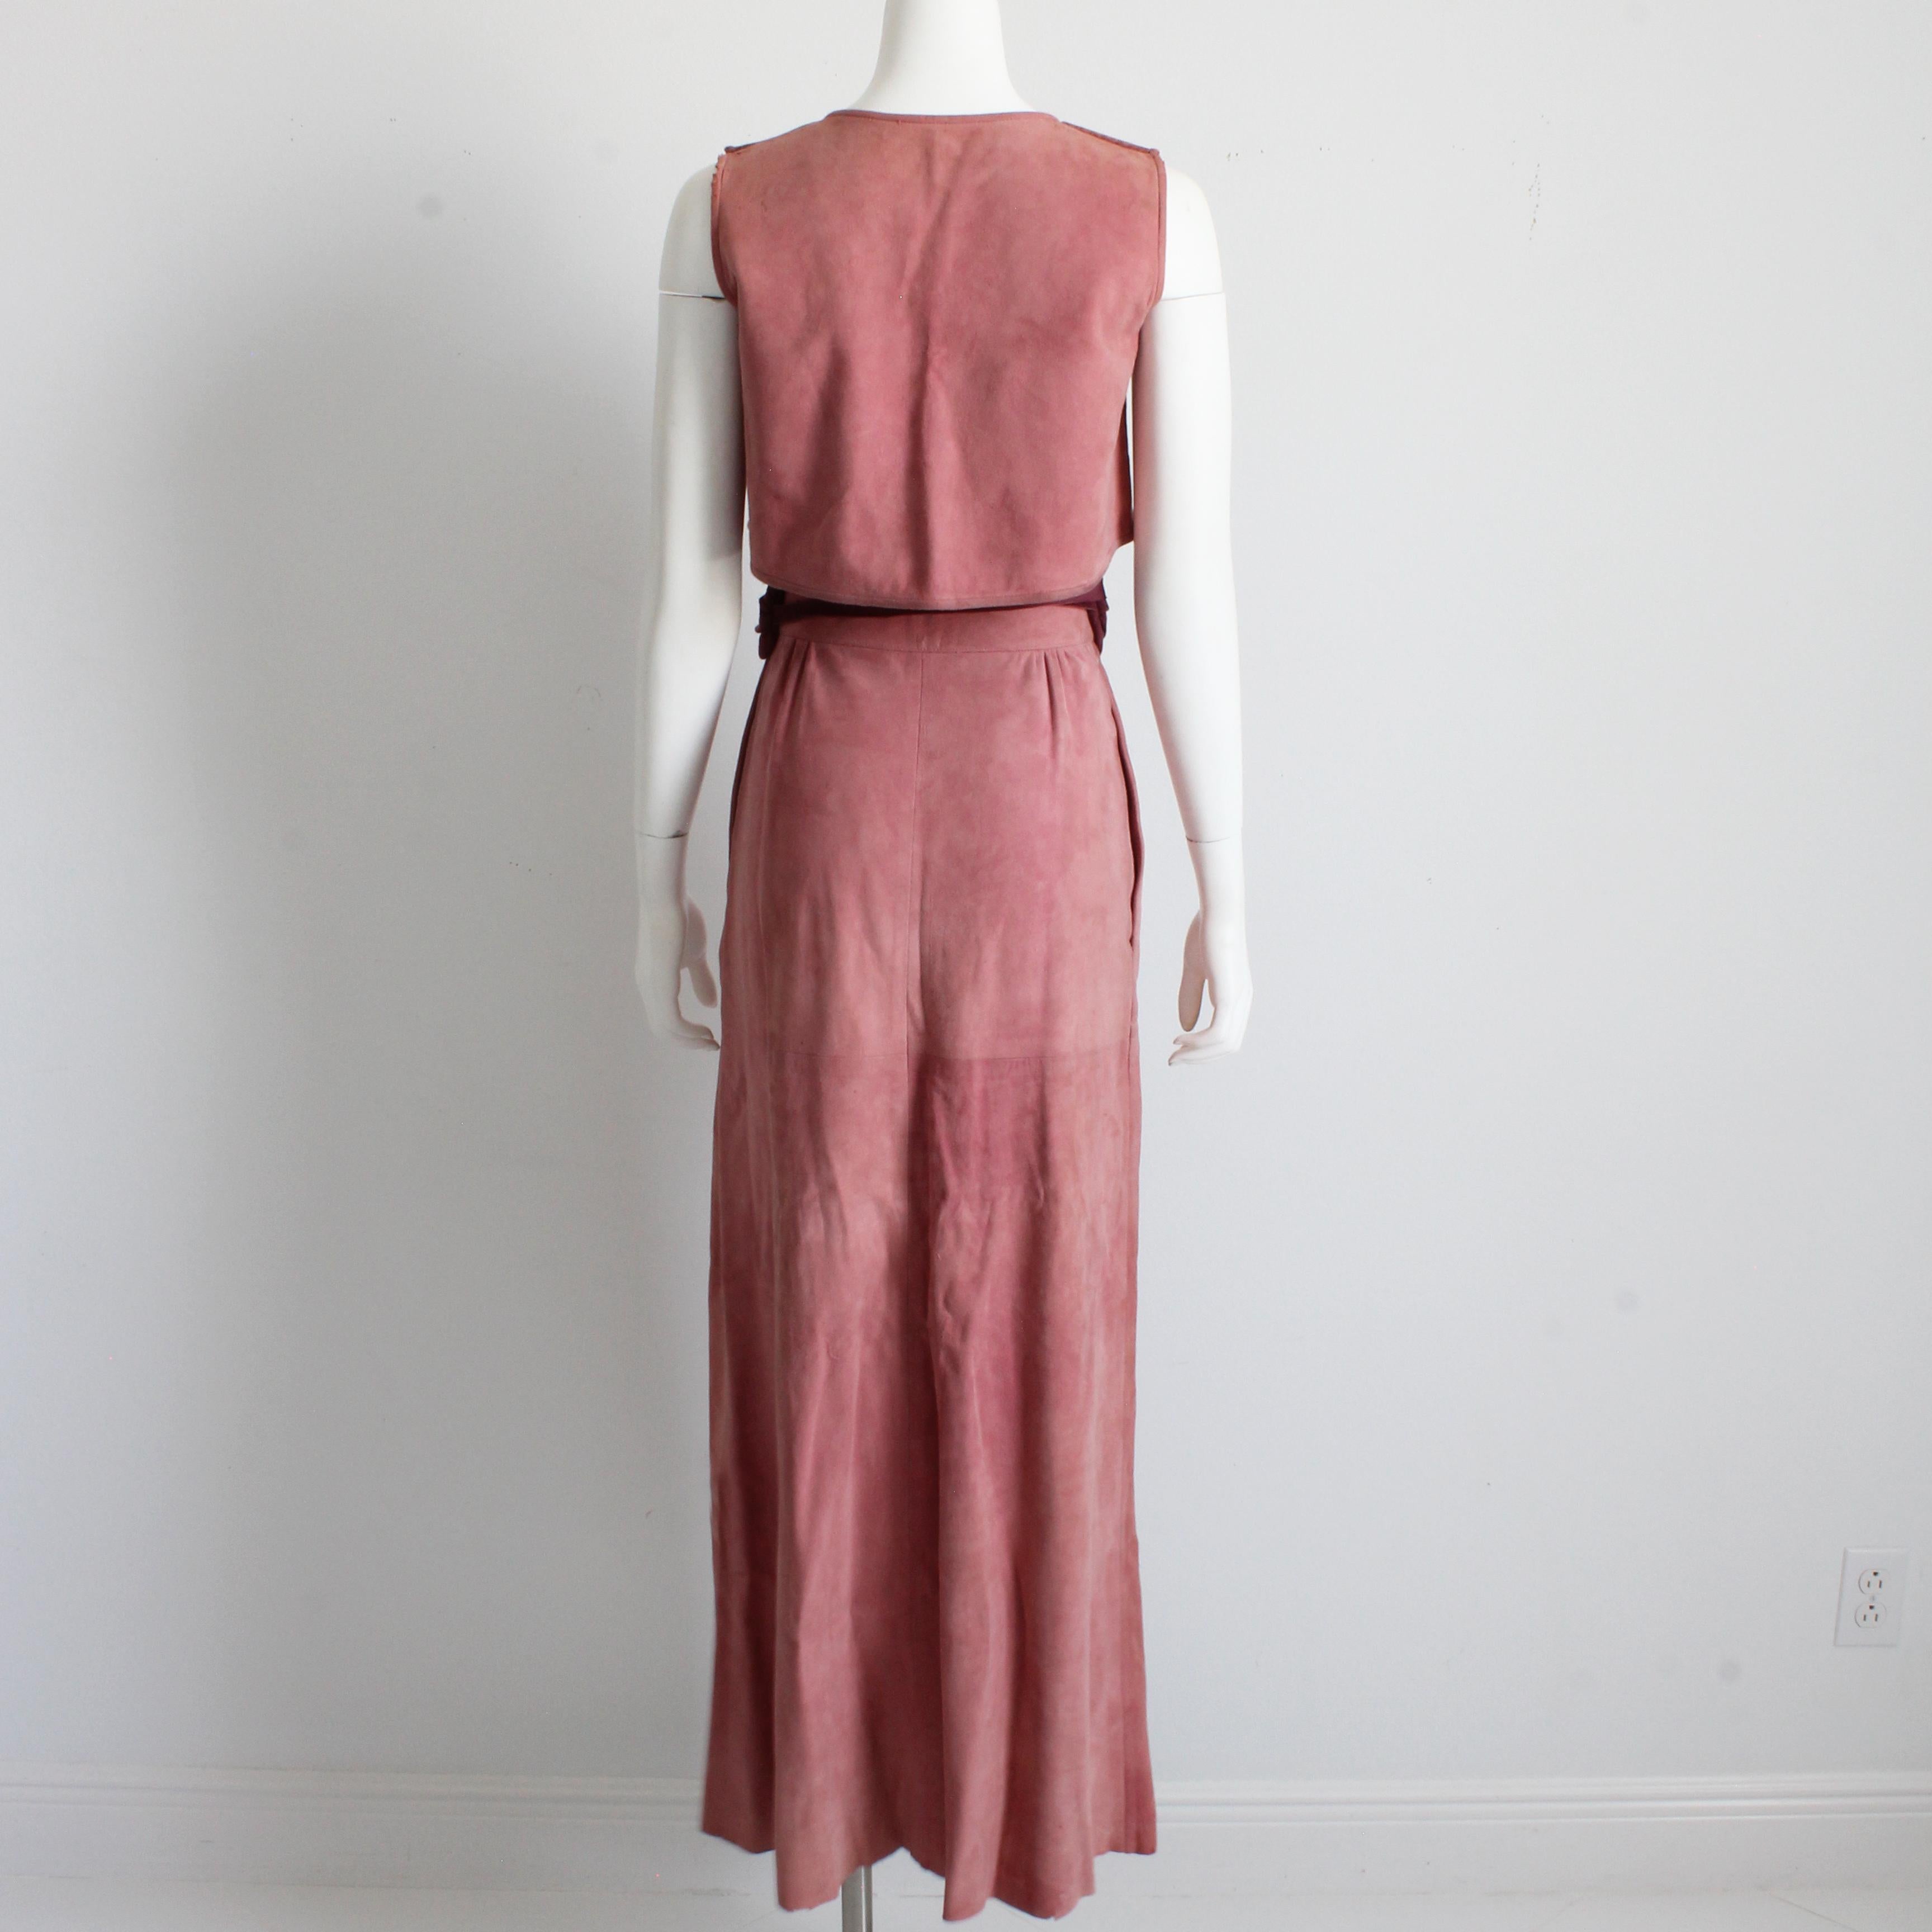 Bonnie Cashin for Sills Pale Pink Suede Skirt Set 3pc Top Skirt and Belt Rare S For Sale 2